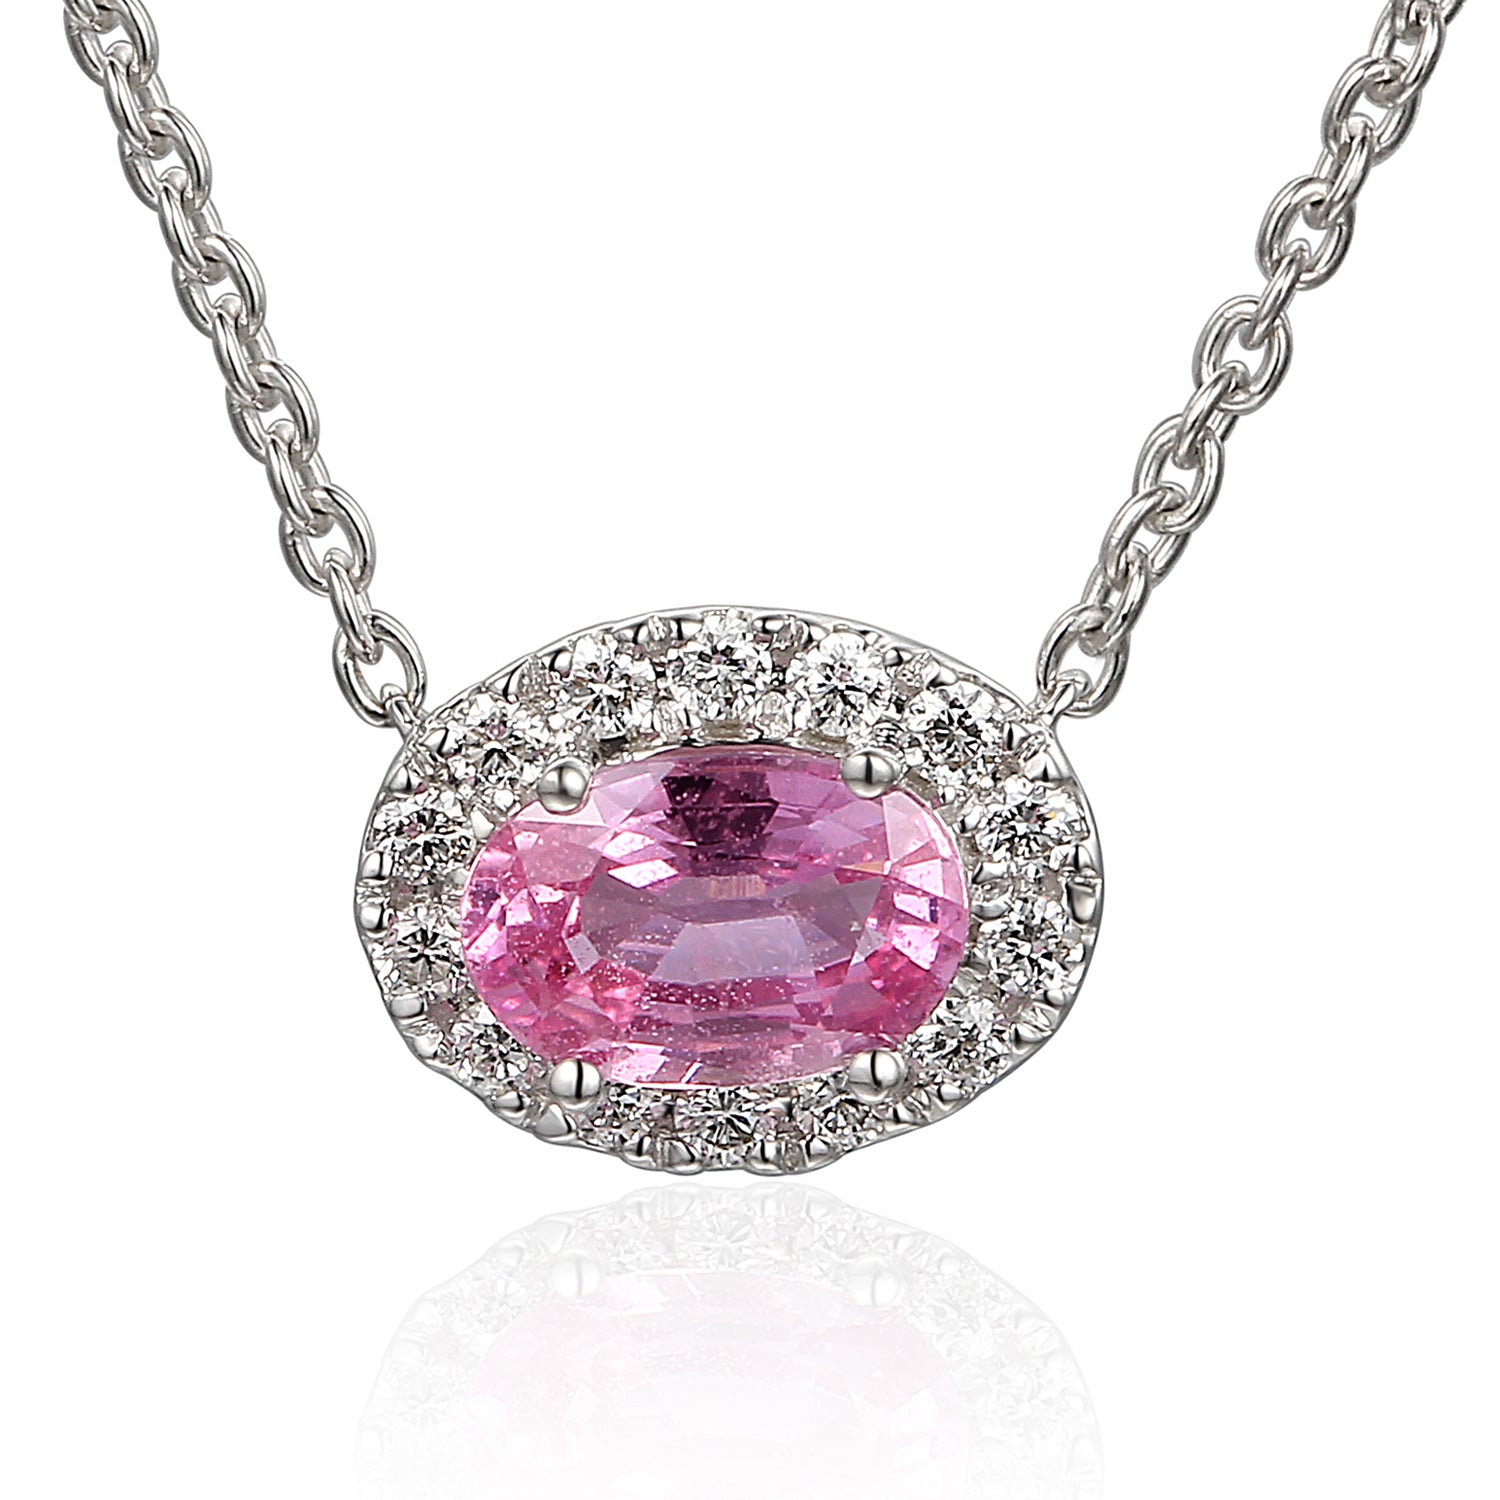 18ct White Gold Oval Pink Sapphire and Diamond Pendant on Chain